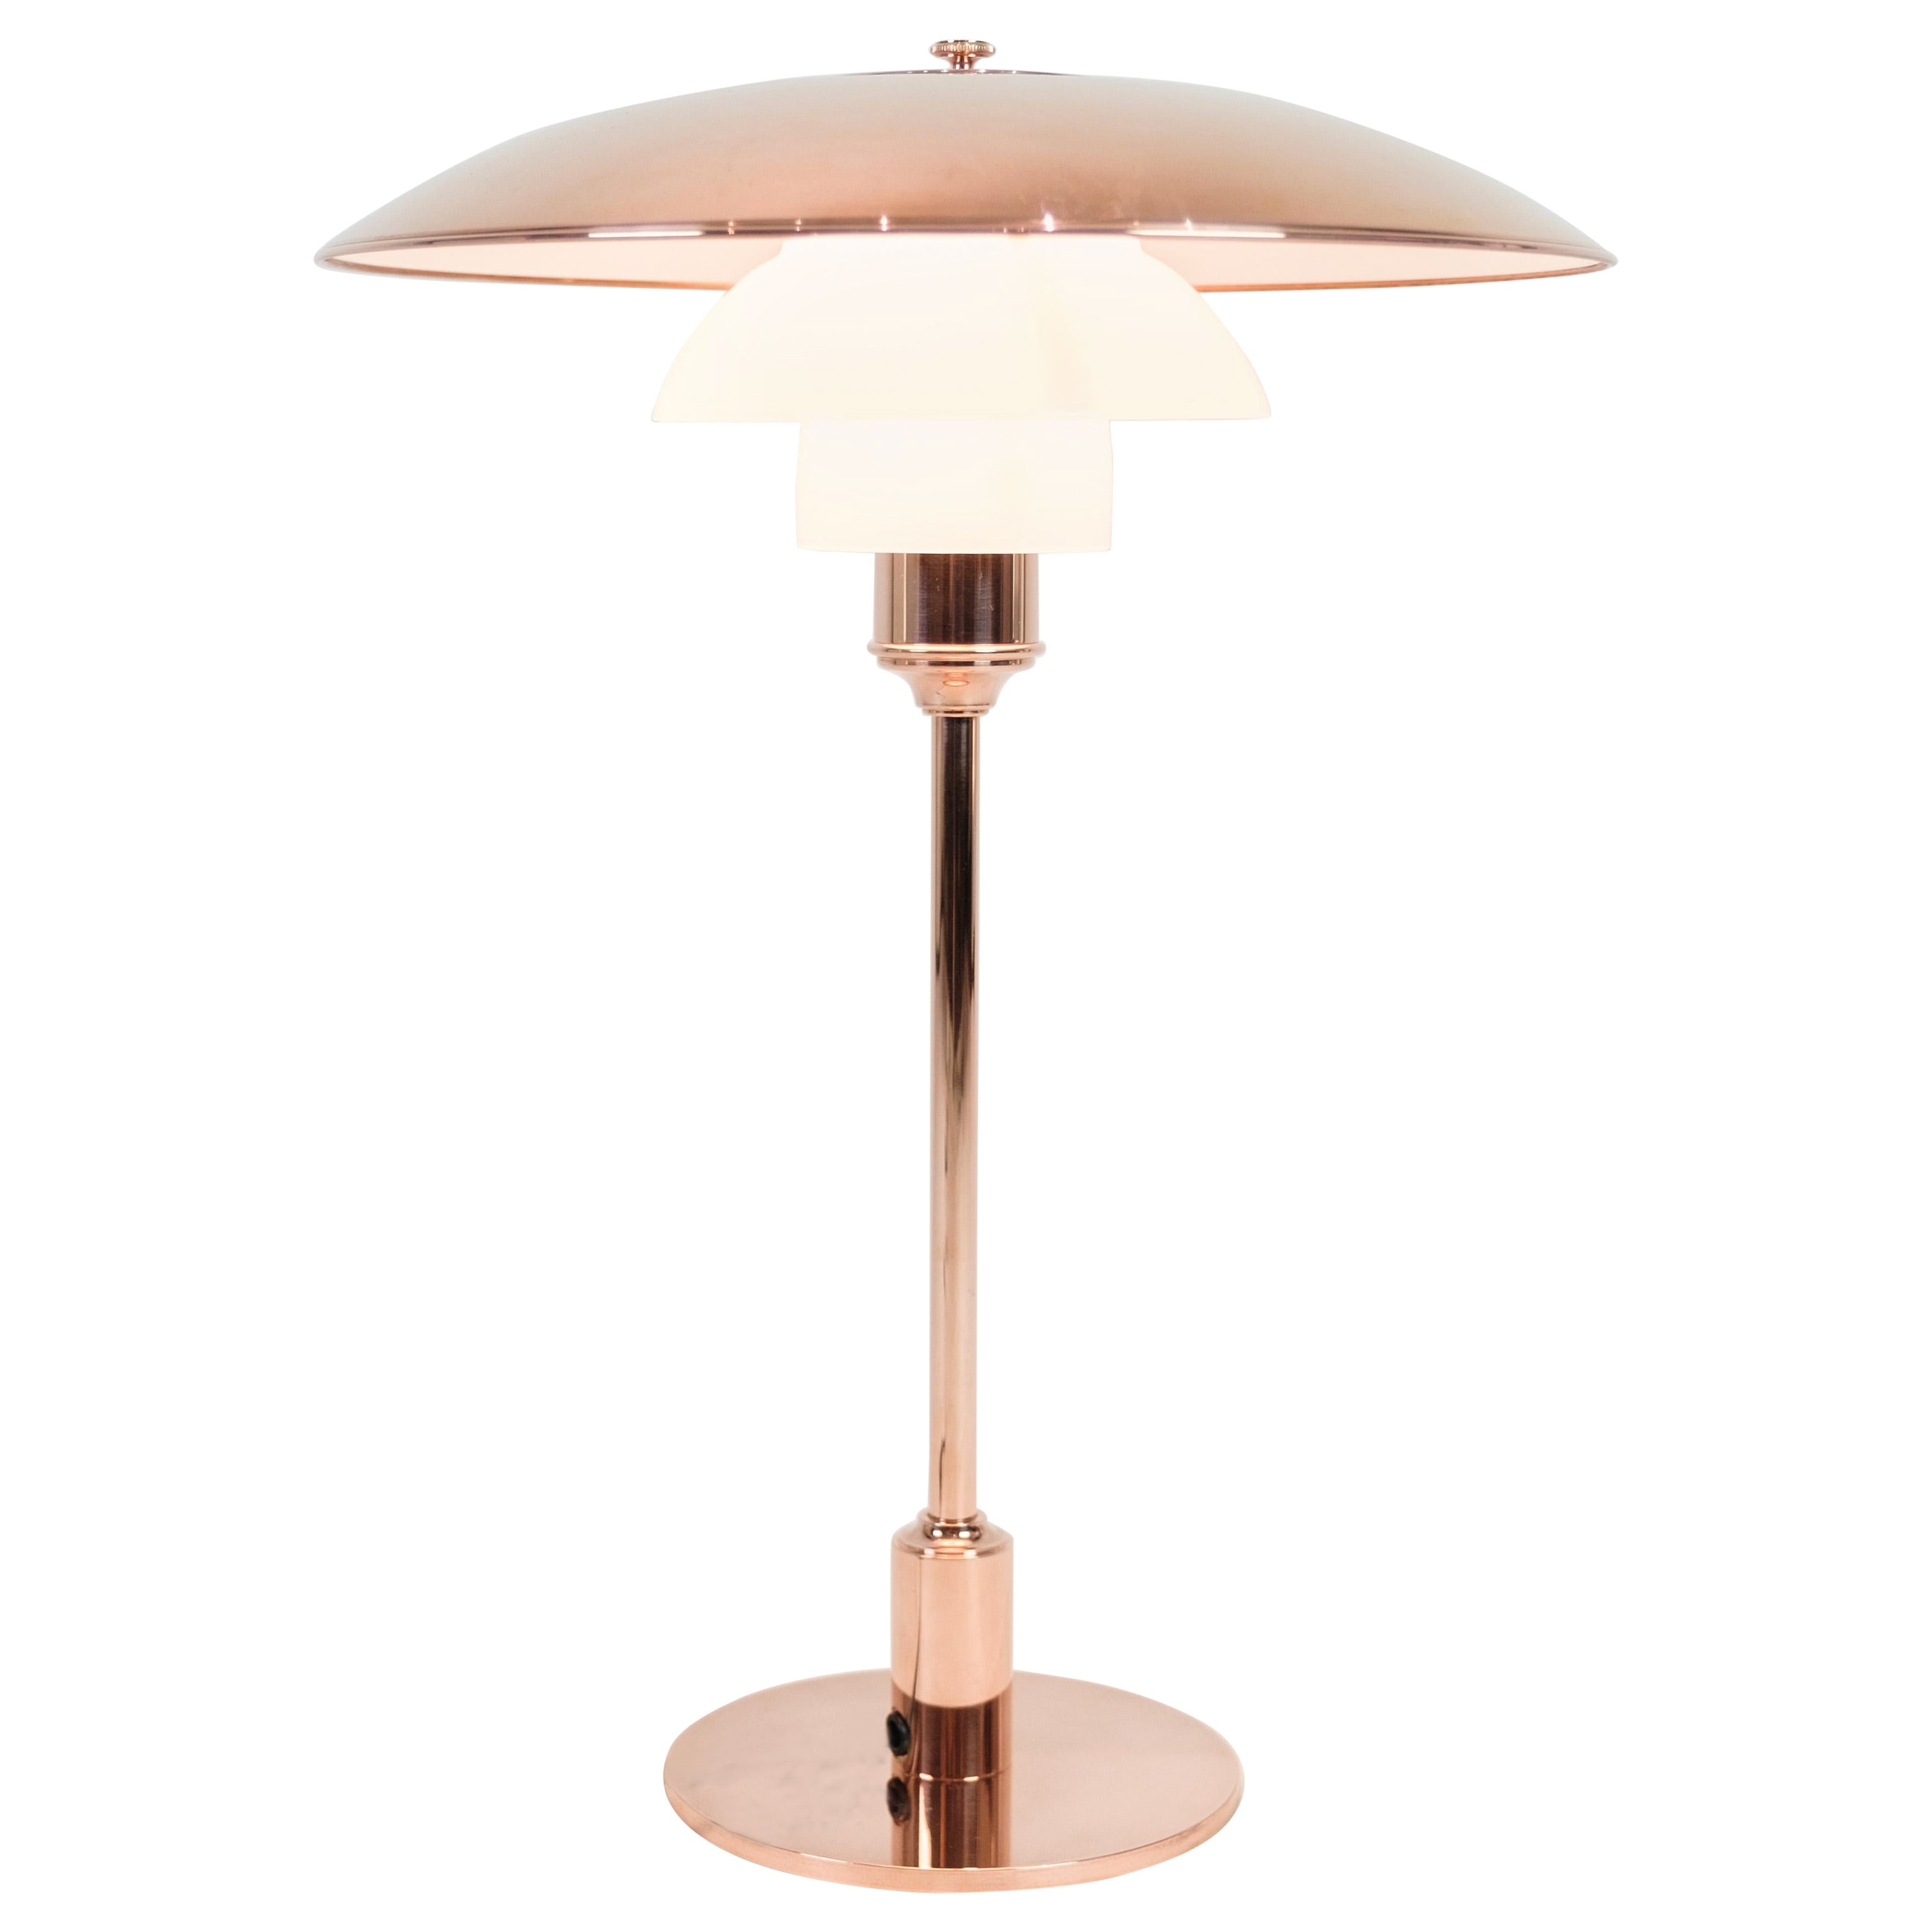 PH Table Lamp, Model Ph3½-2½, Limited Edition, Poul Henningsen, Louis For Sale at | ph lampa original 1928